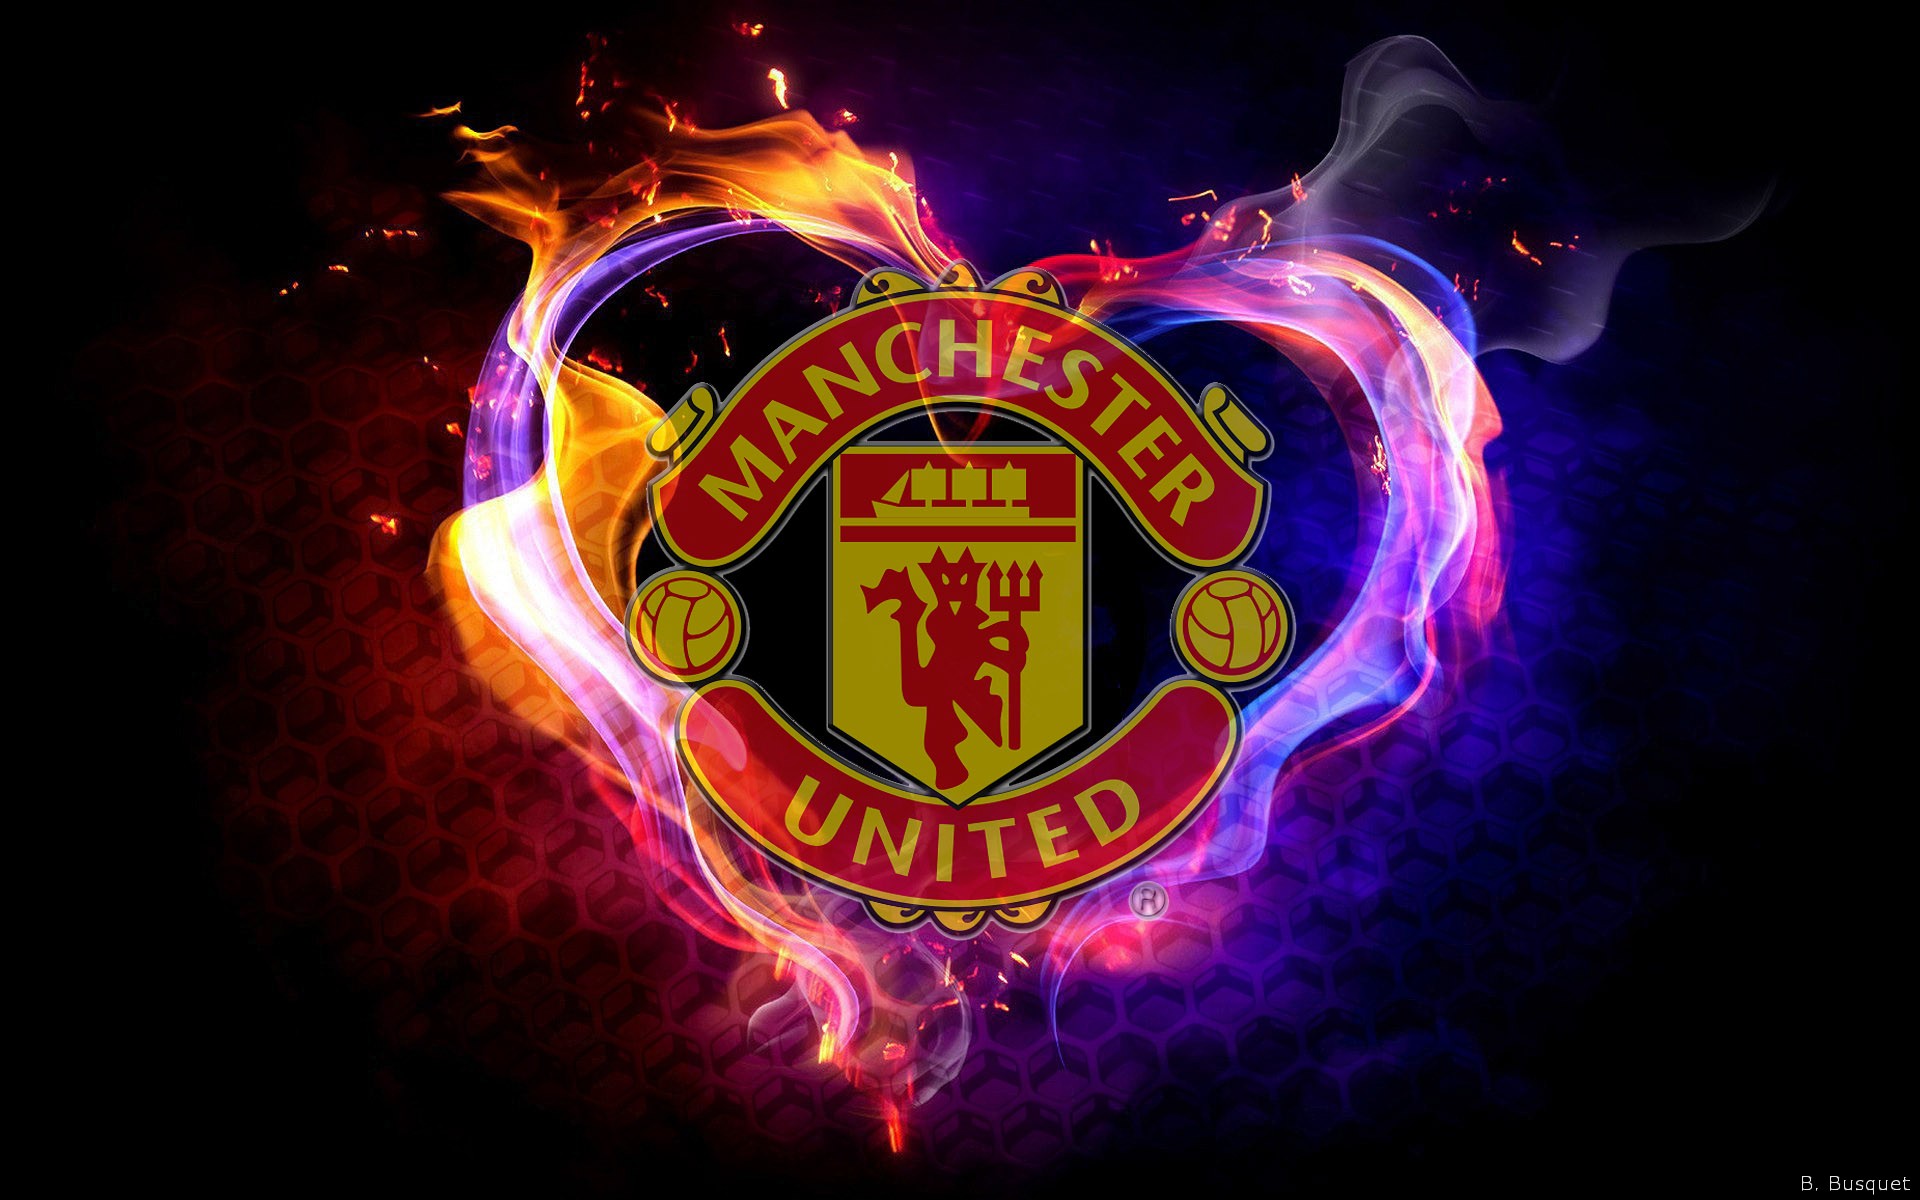  Manchester  United  wallpaper    Download free cool full HD  